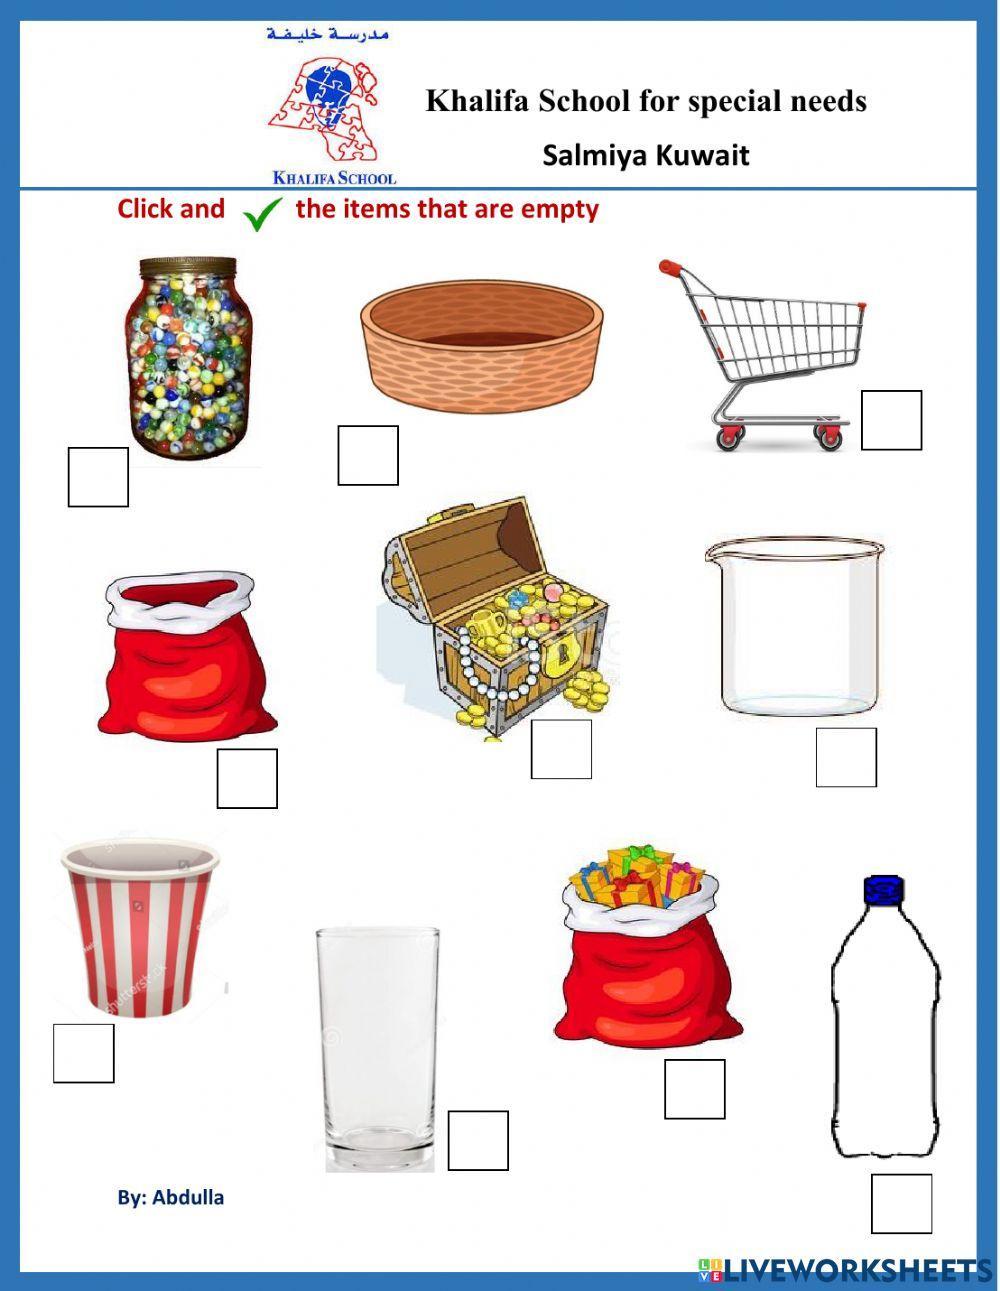 Select the items that are empty